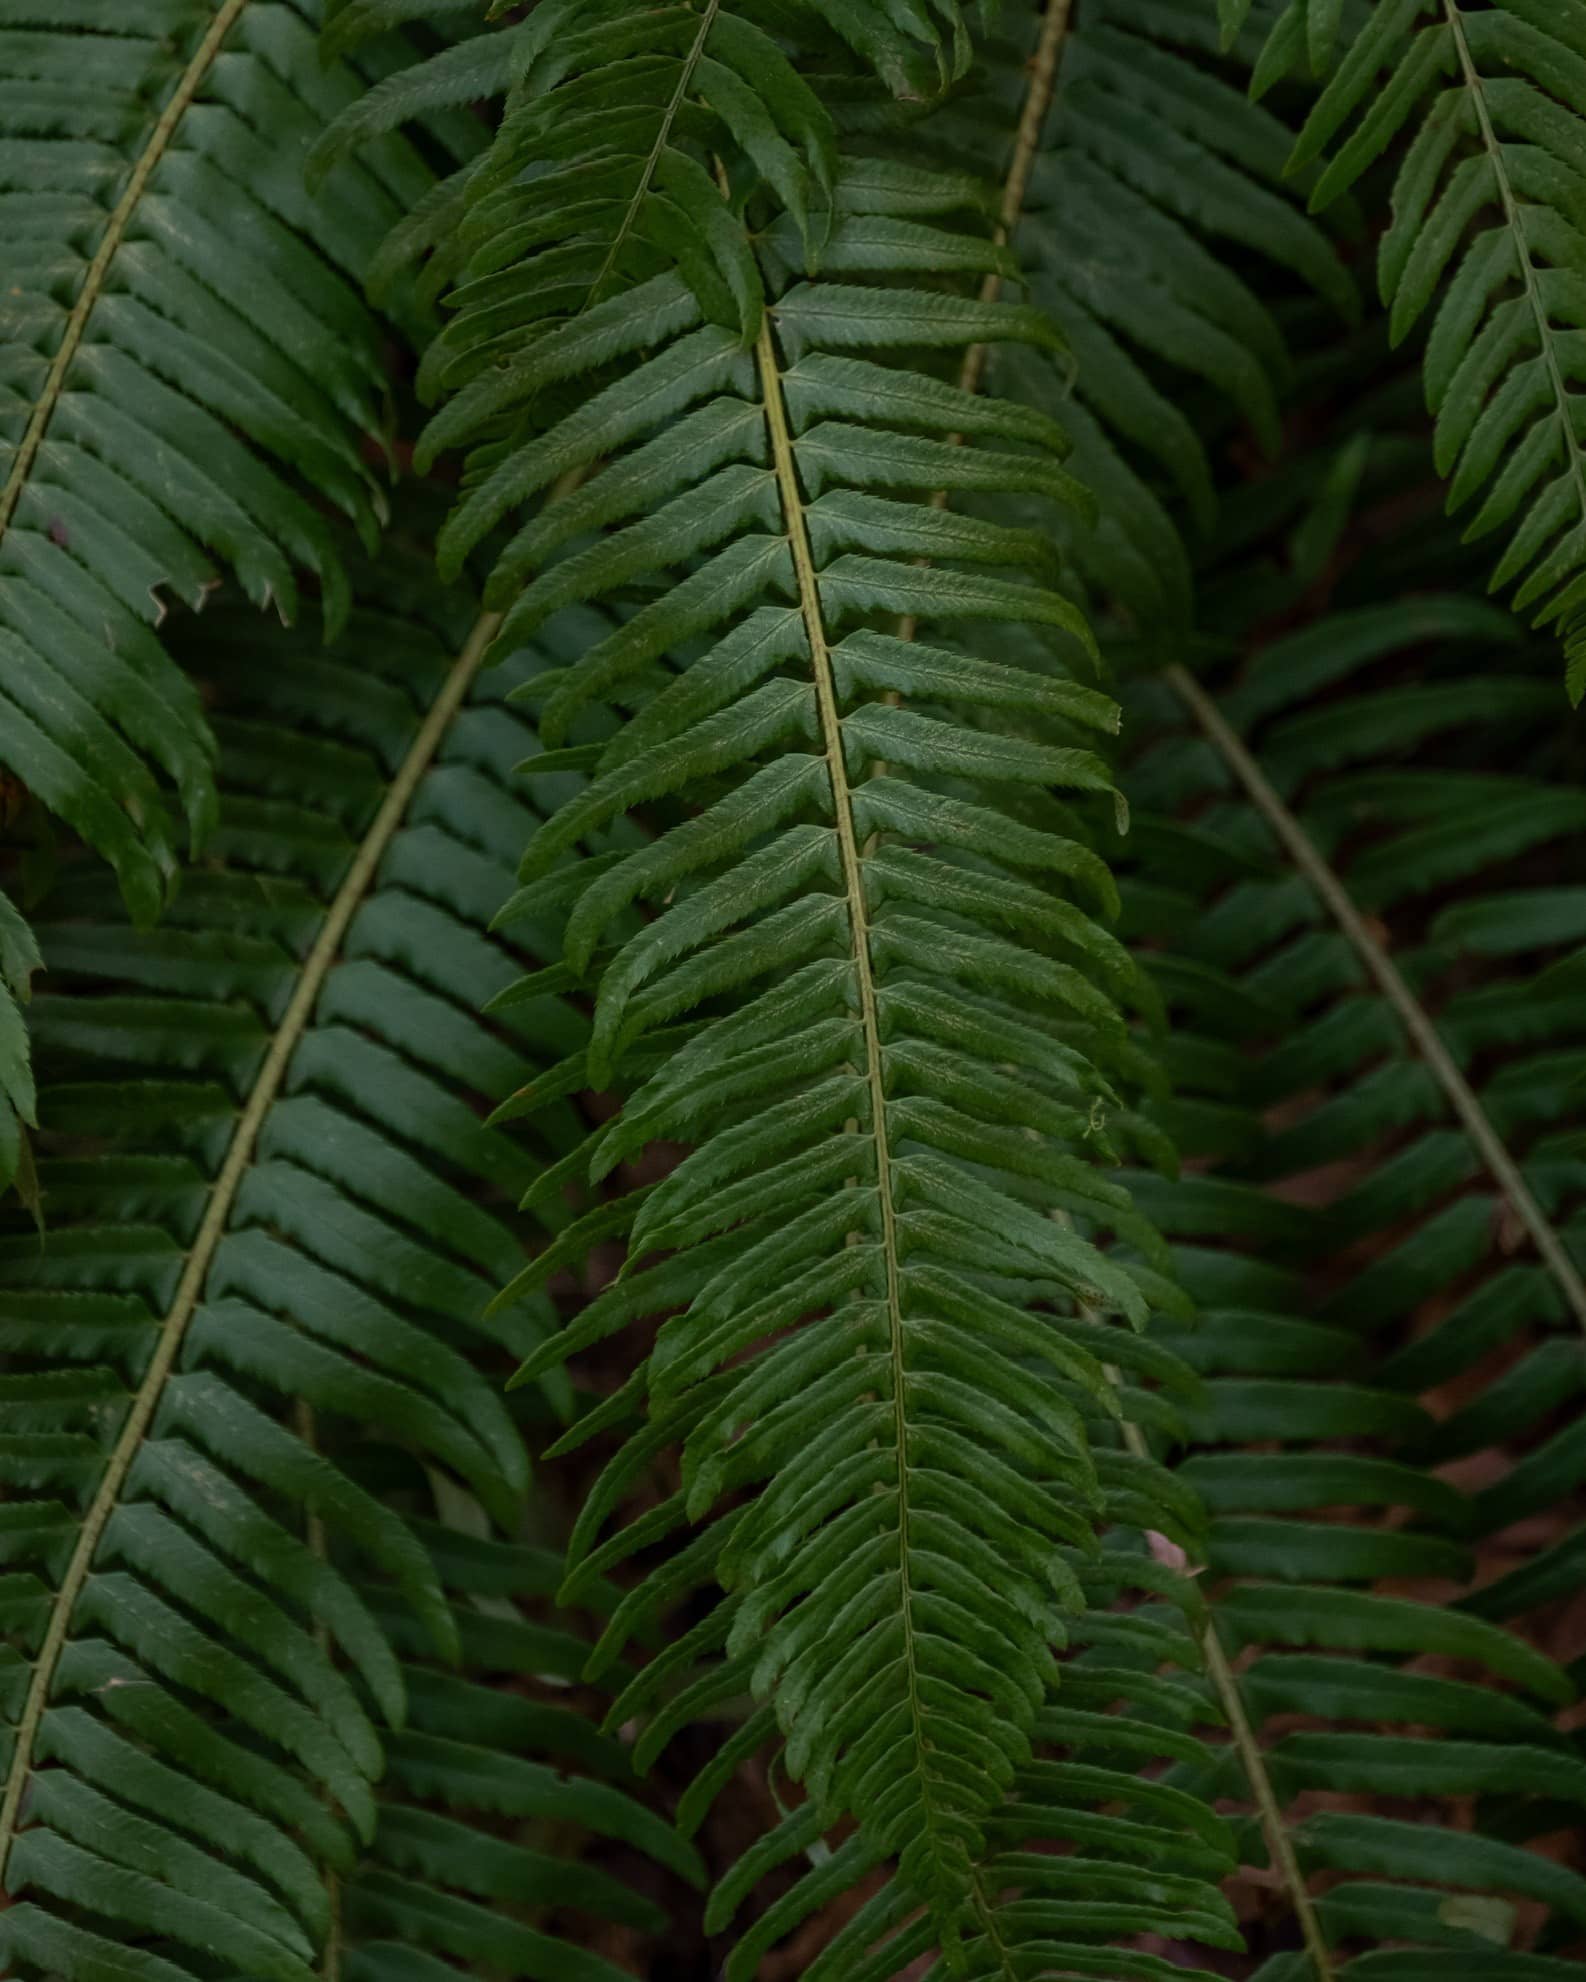 A close-up of fern leaves.